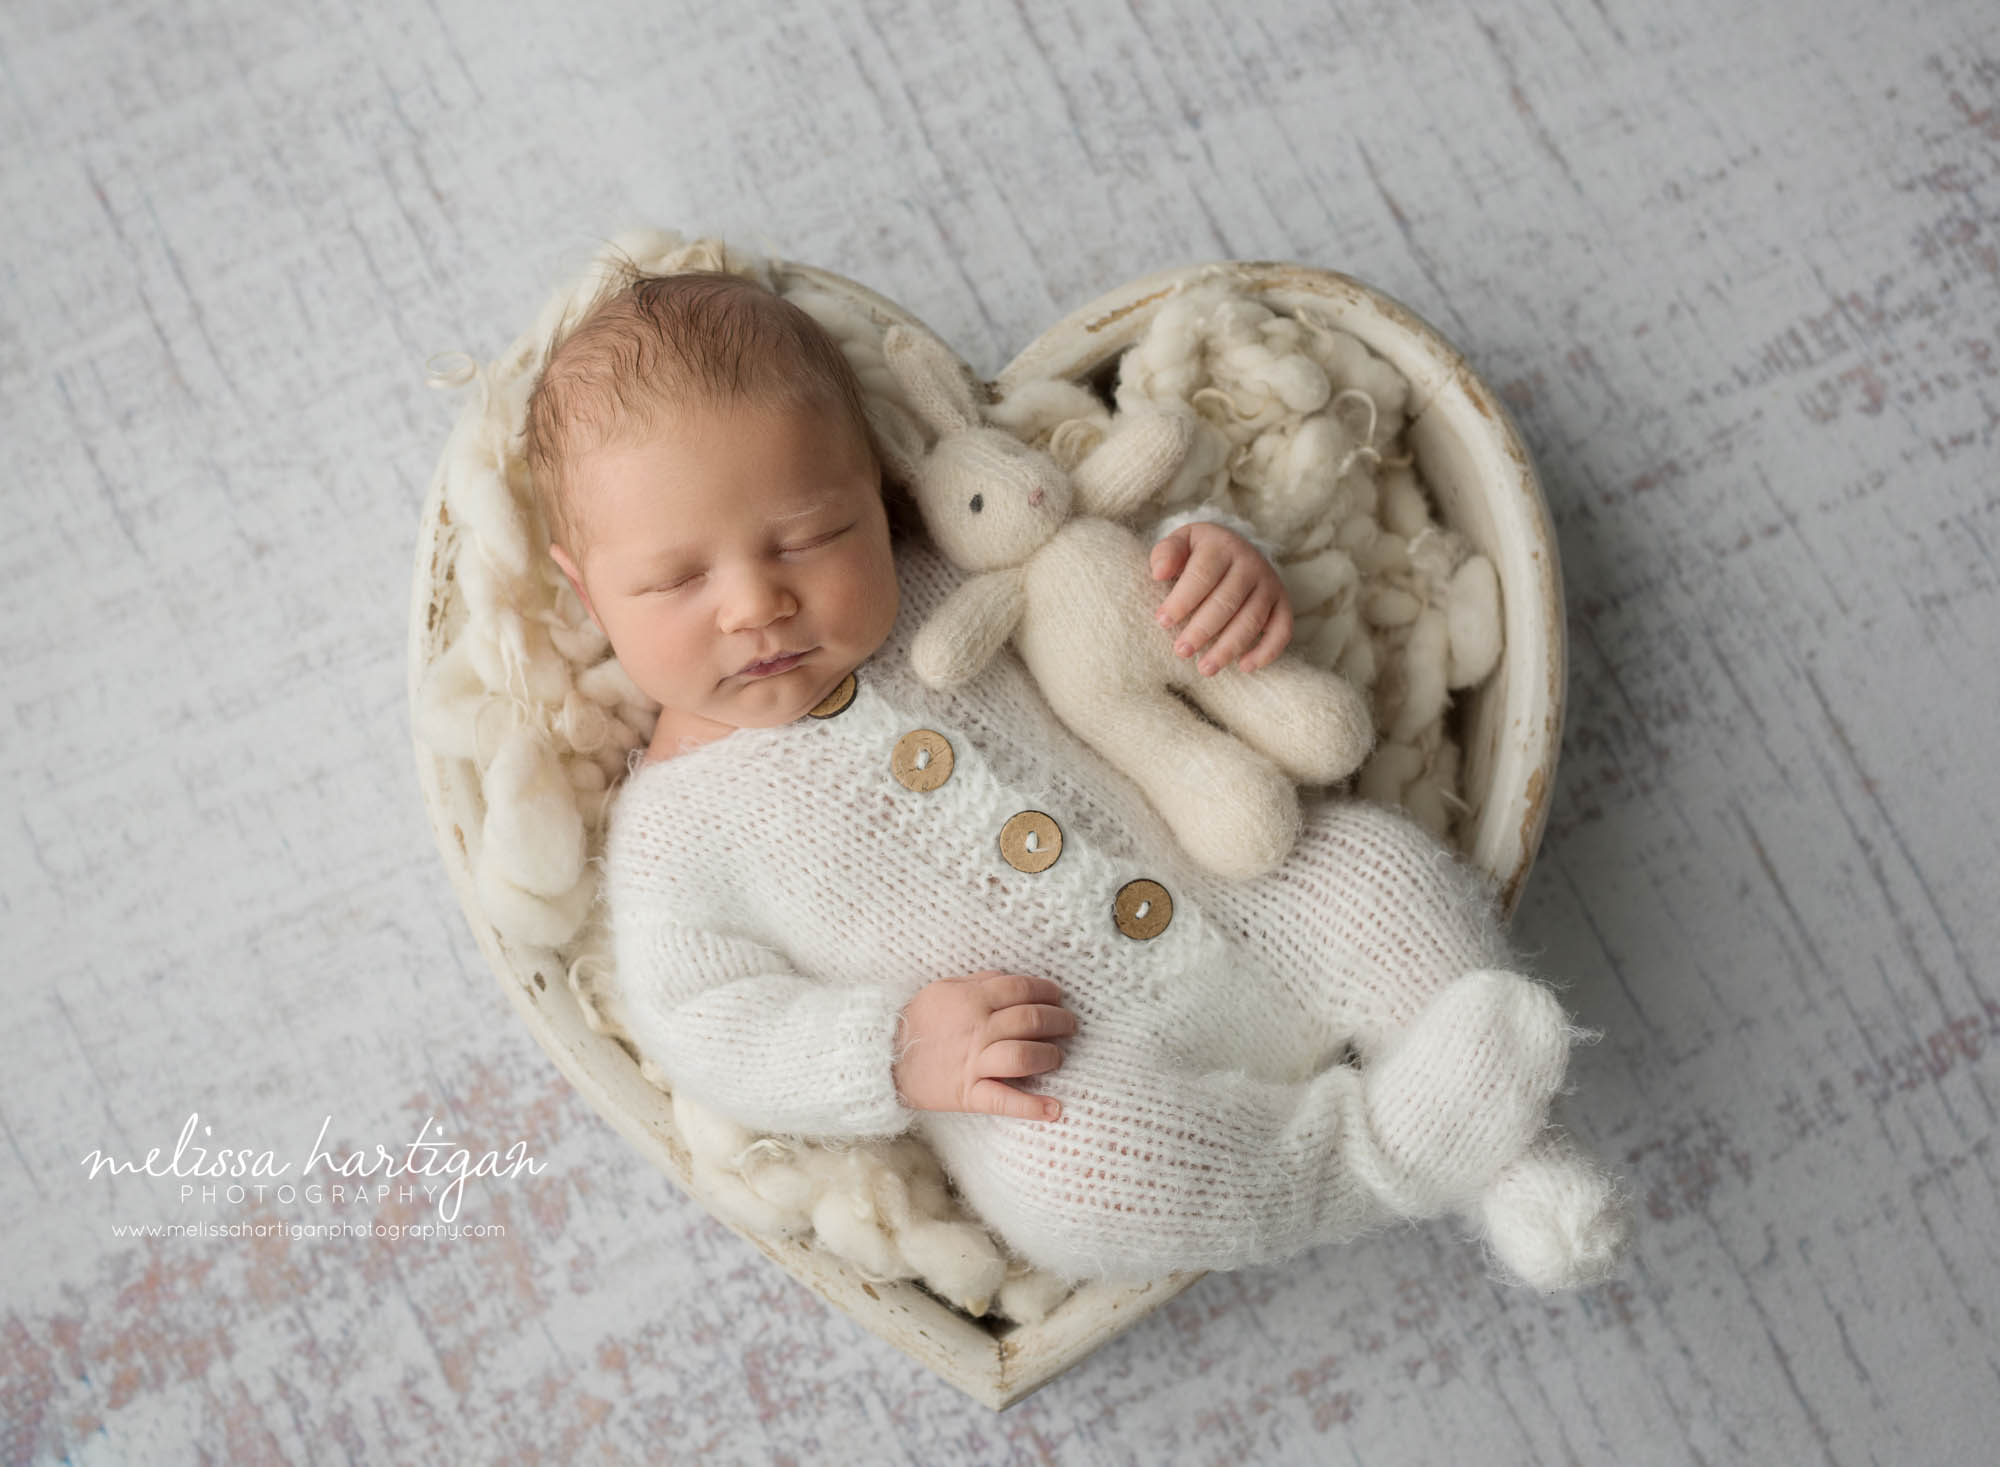 newborn baby boy posed in wooden heart bowl wearing knitted footed outfit holding knitted teddy bear newborn photography windham county